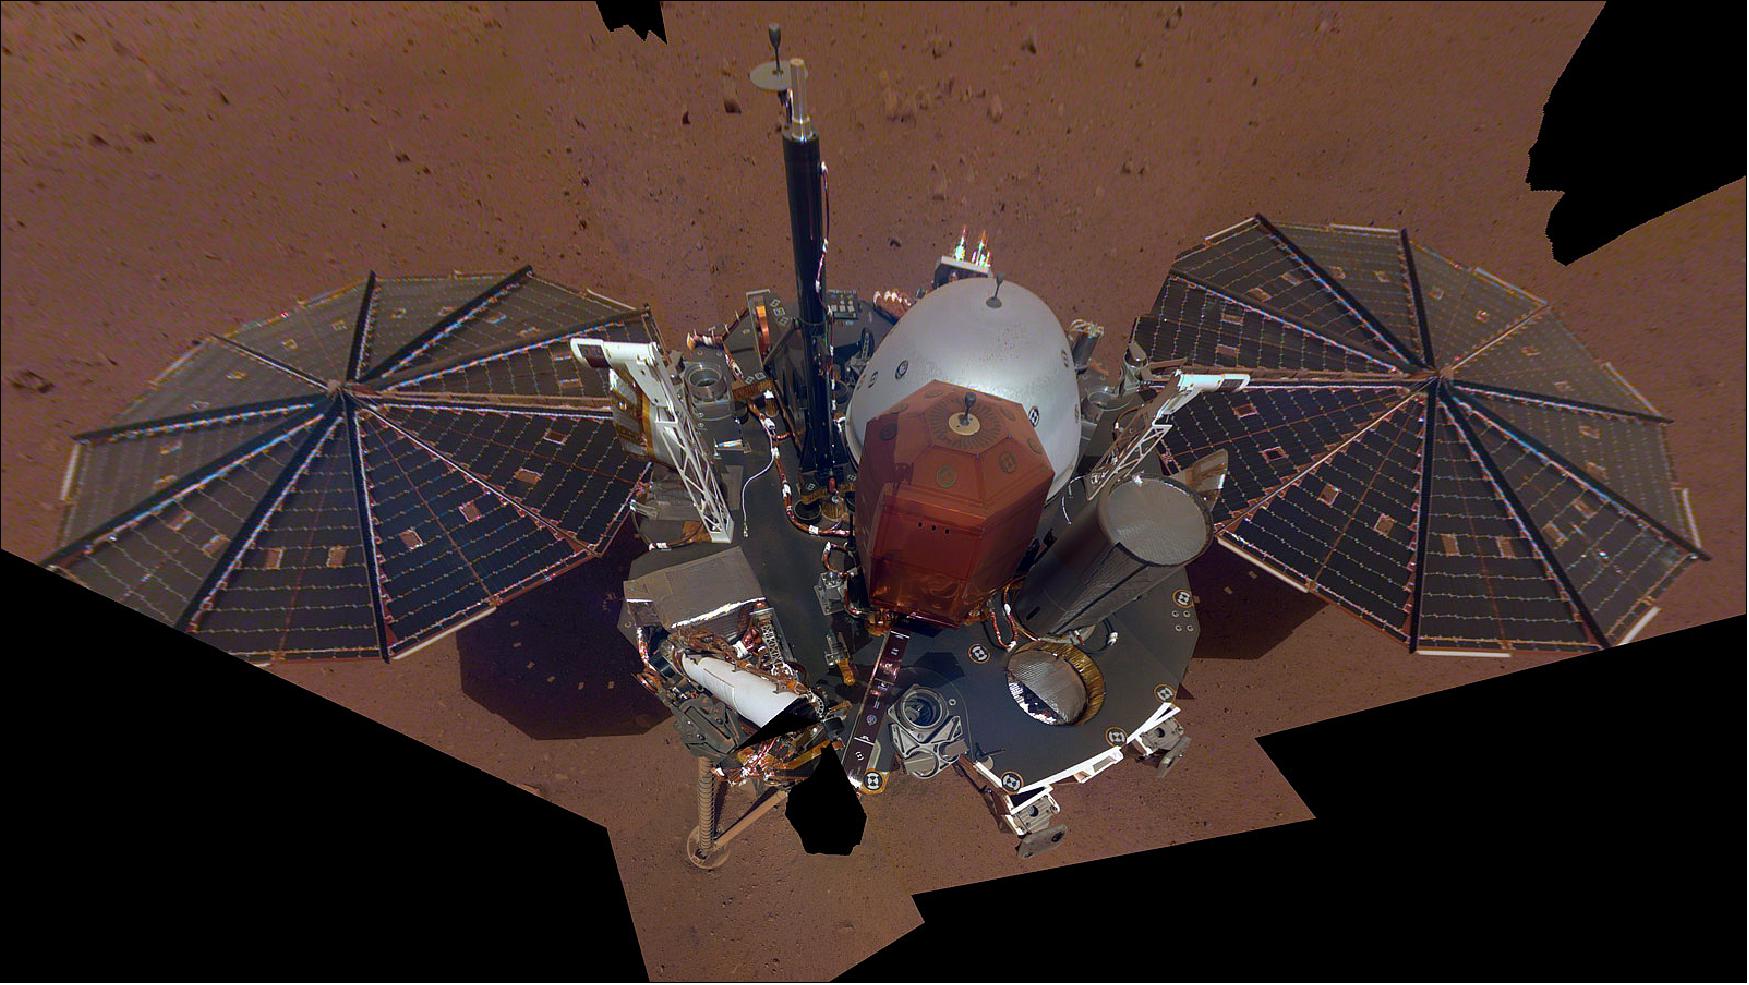 Figure 50: This is NASA InSight's first selfie on Mars. It displays the lander's solar panels and deck. On top of the deck are its science instruments, weather sensor booms and UHF antenna (image credit: NASA/JPL-Caltech)